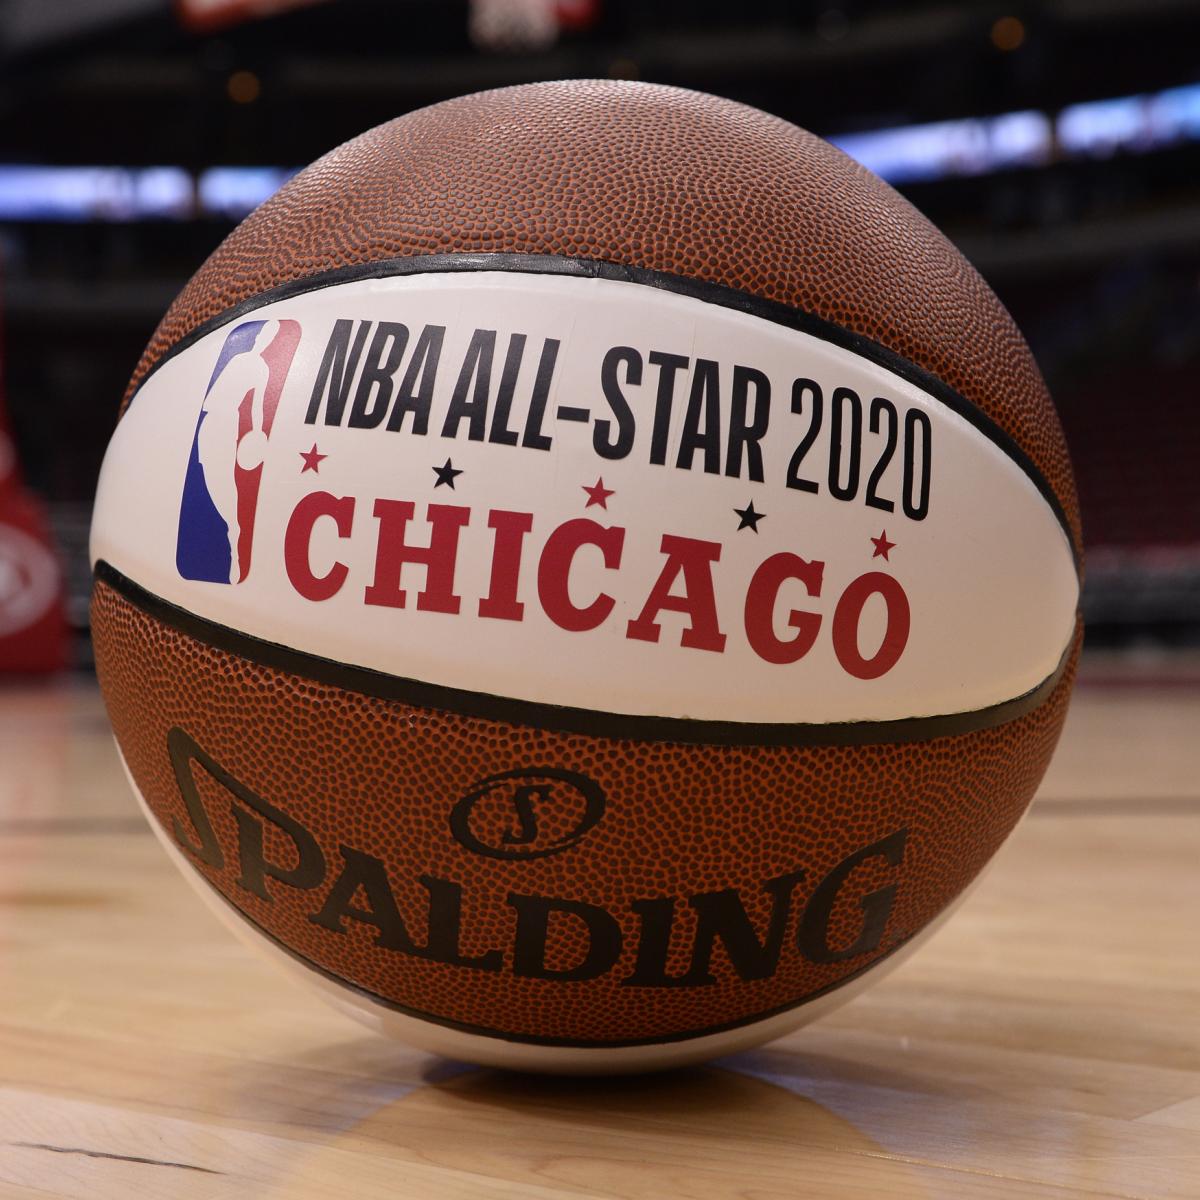 NBA changing All-Star Game format, adds Kobe tribute - Sports